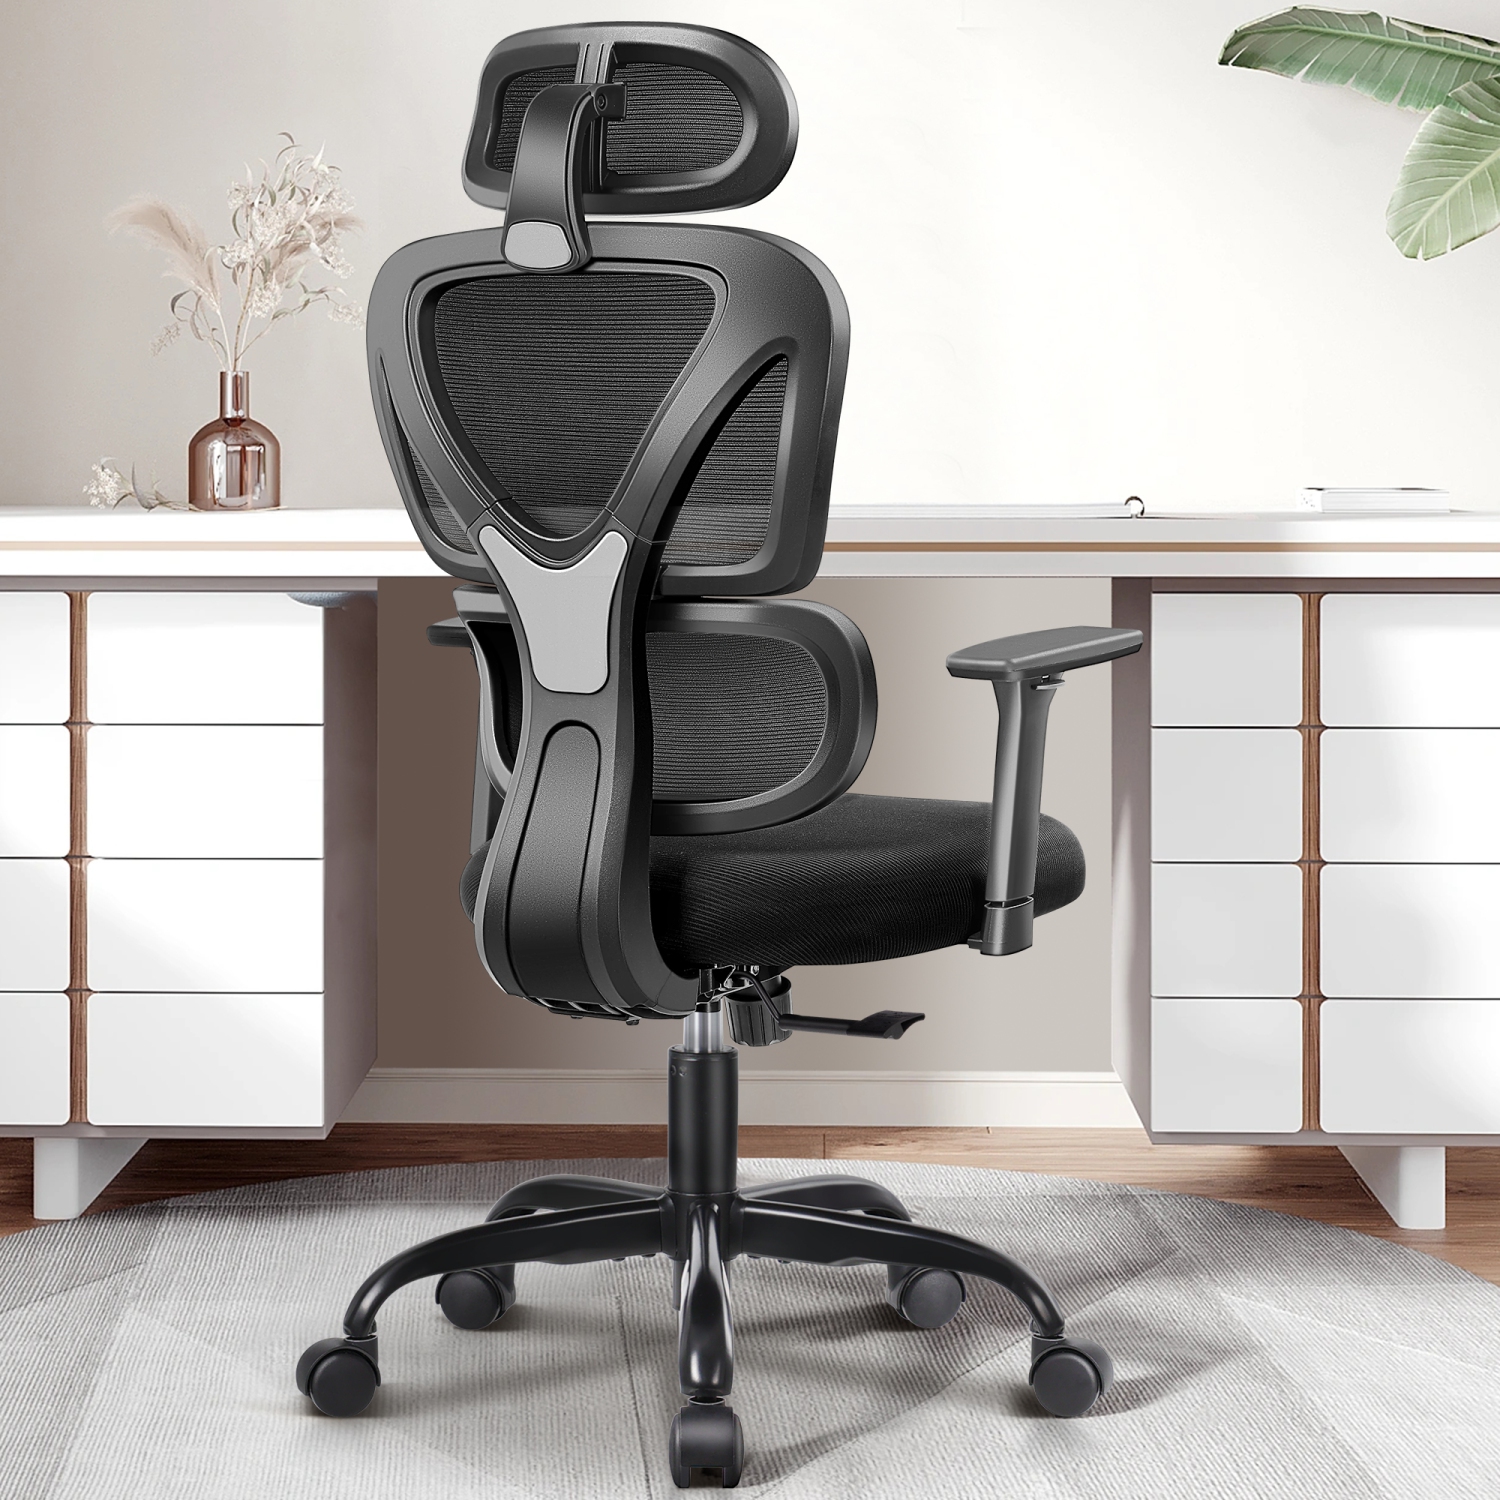 CoolHut Office Chair - Home Desk Chair, Comfy Breathable Mesh Task Chair, High Back Thick Cushion Computer Chair with Headrest and 3D Armrests, Adjustable Height Gaming Chair